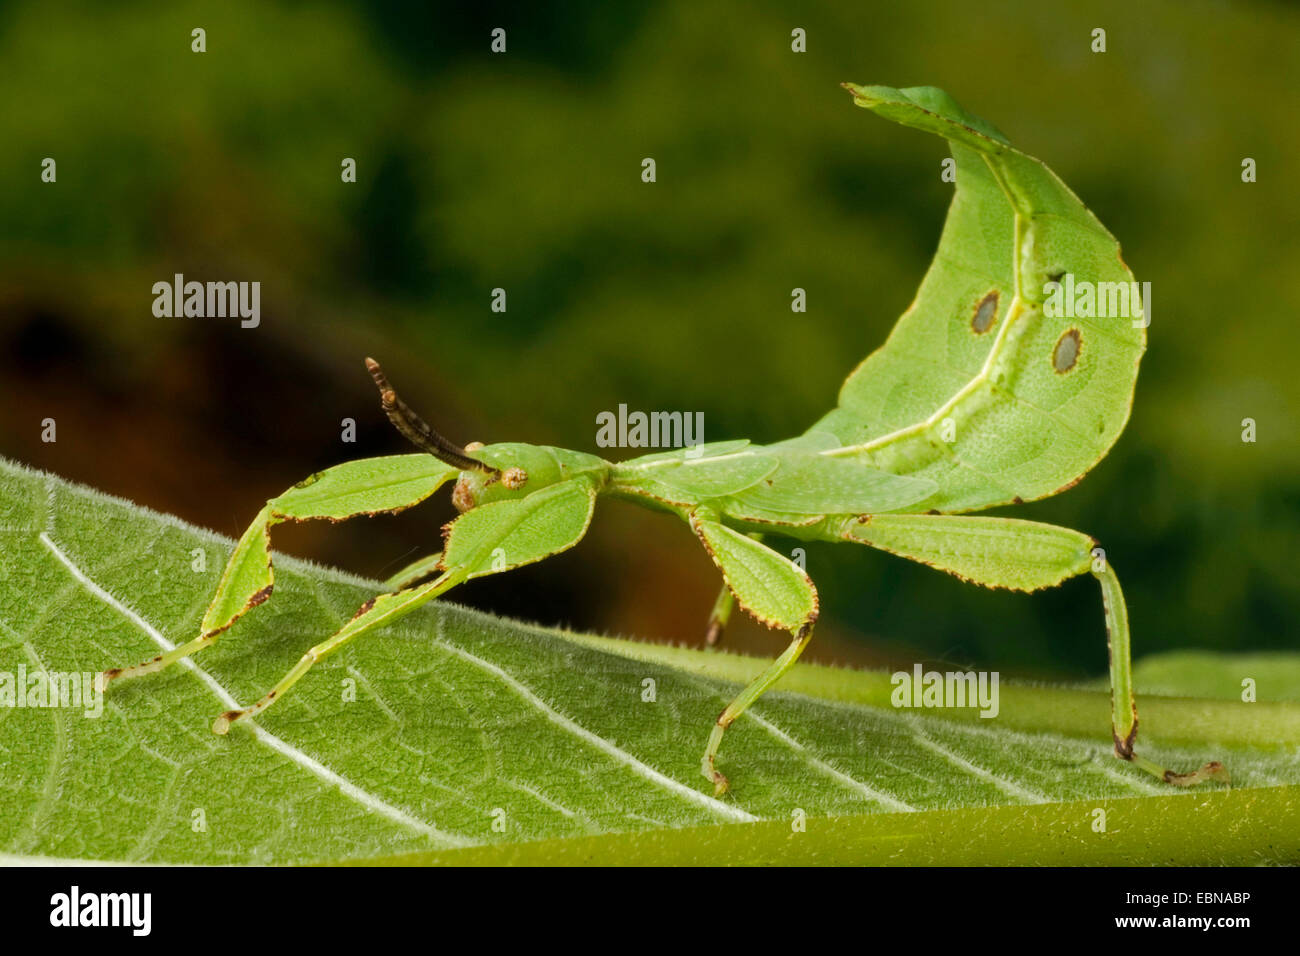 Leaf-Insect, leaf insect (Phyllium celebicum), on a leaf Stock Photo